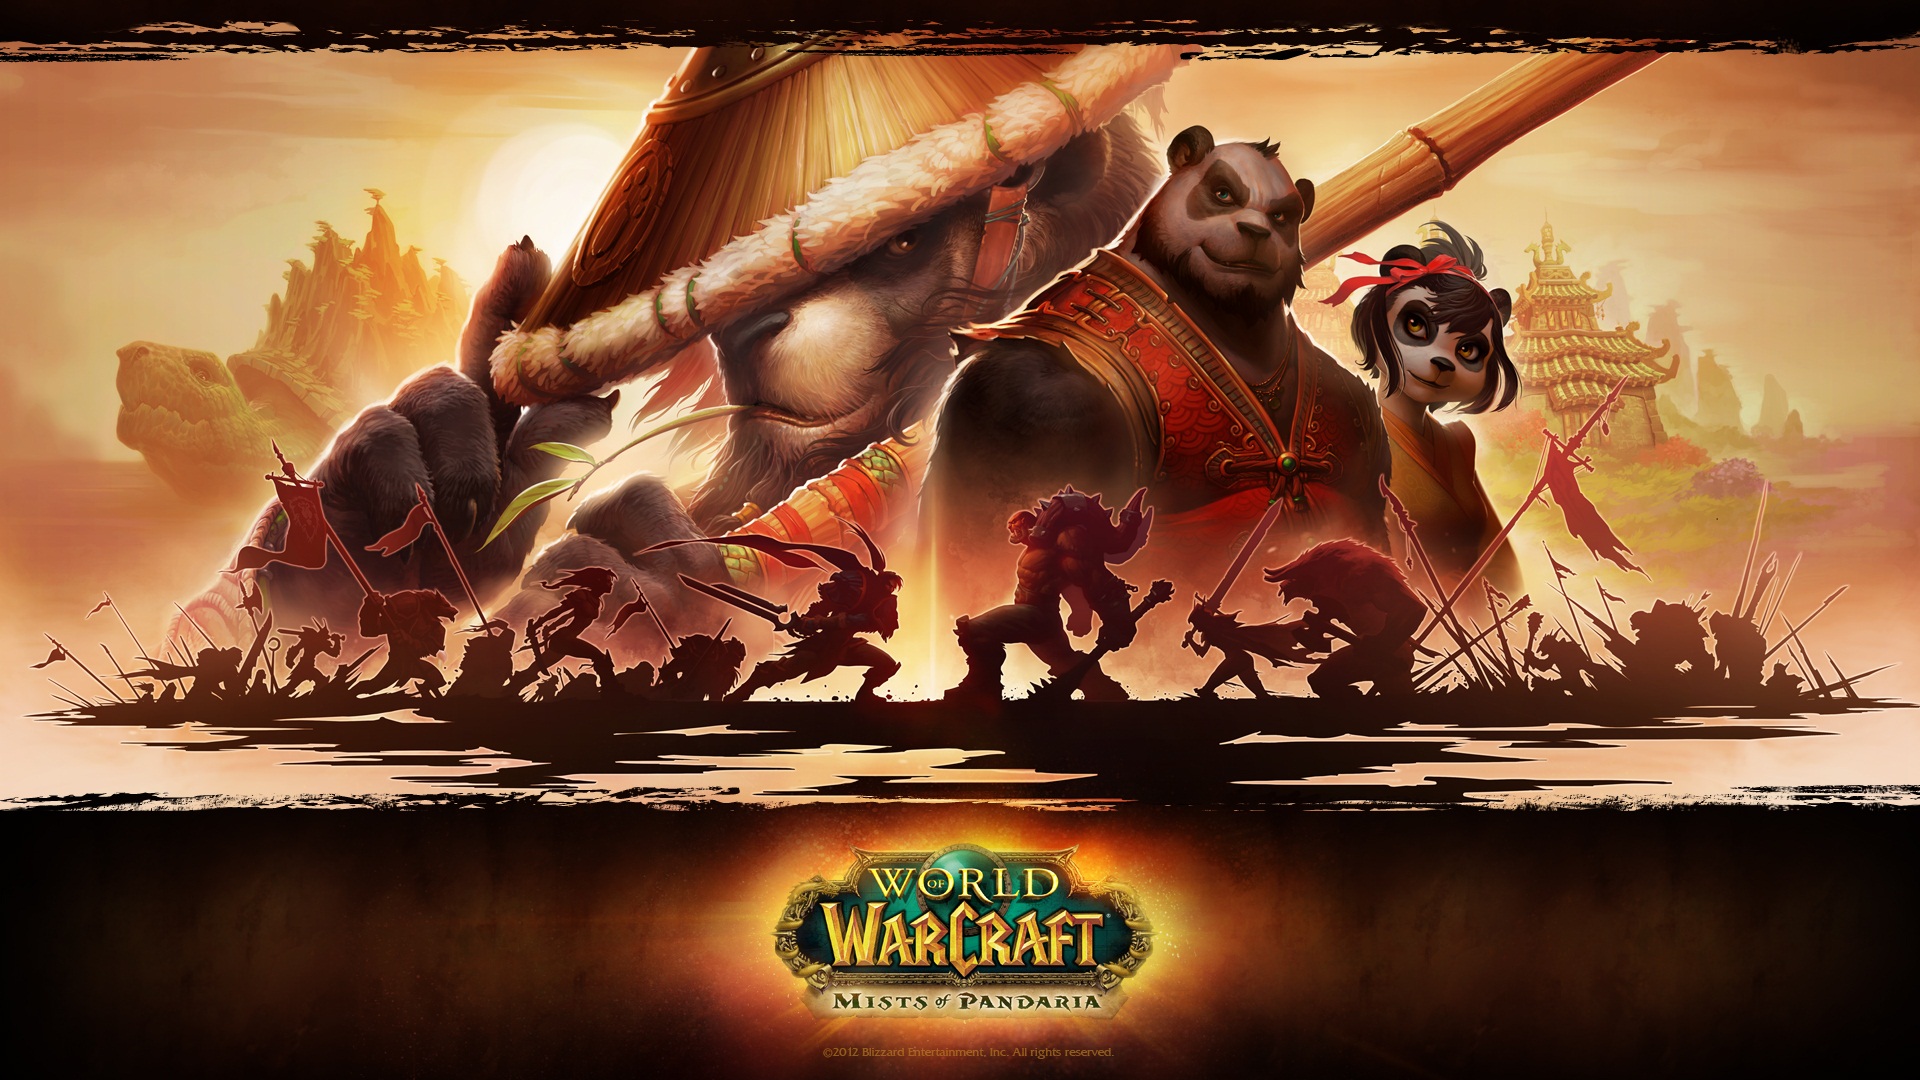 World of Warcraft: Mists of Pandaria HD wallpapers #7 - 1920x1080